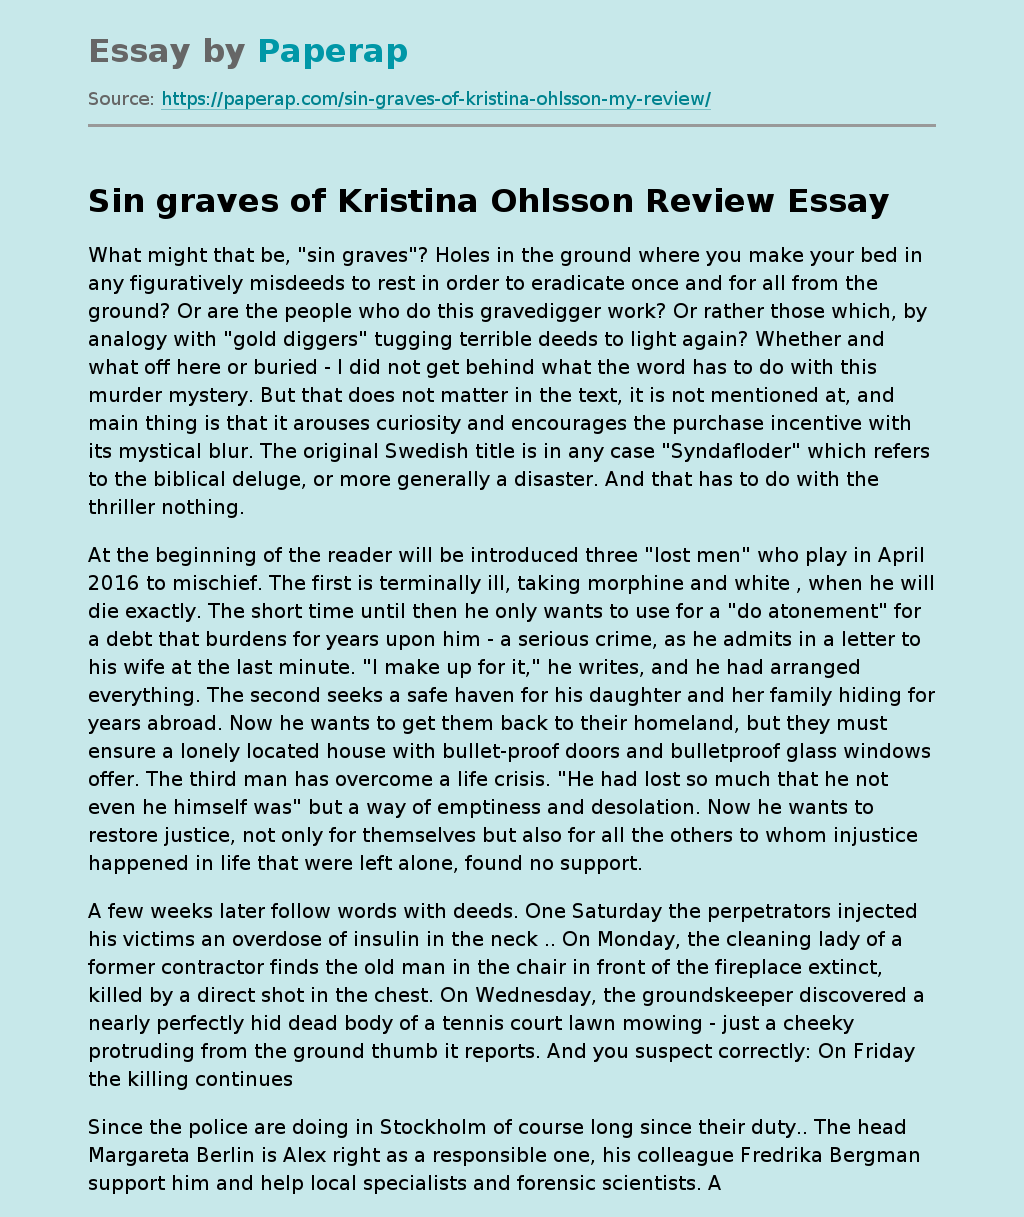 Sin graves of Kristina Ohlsson Review